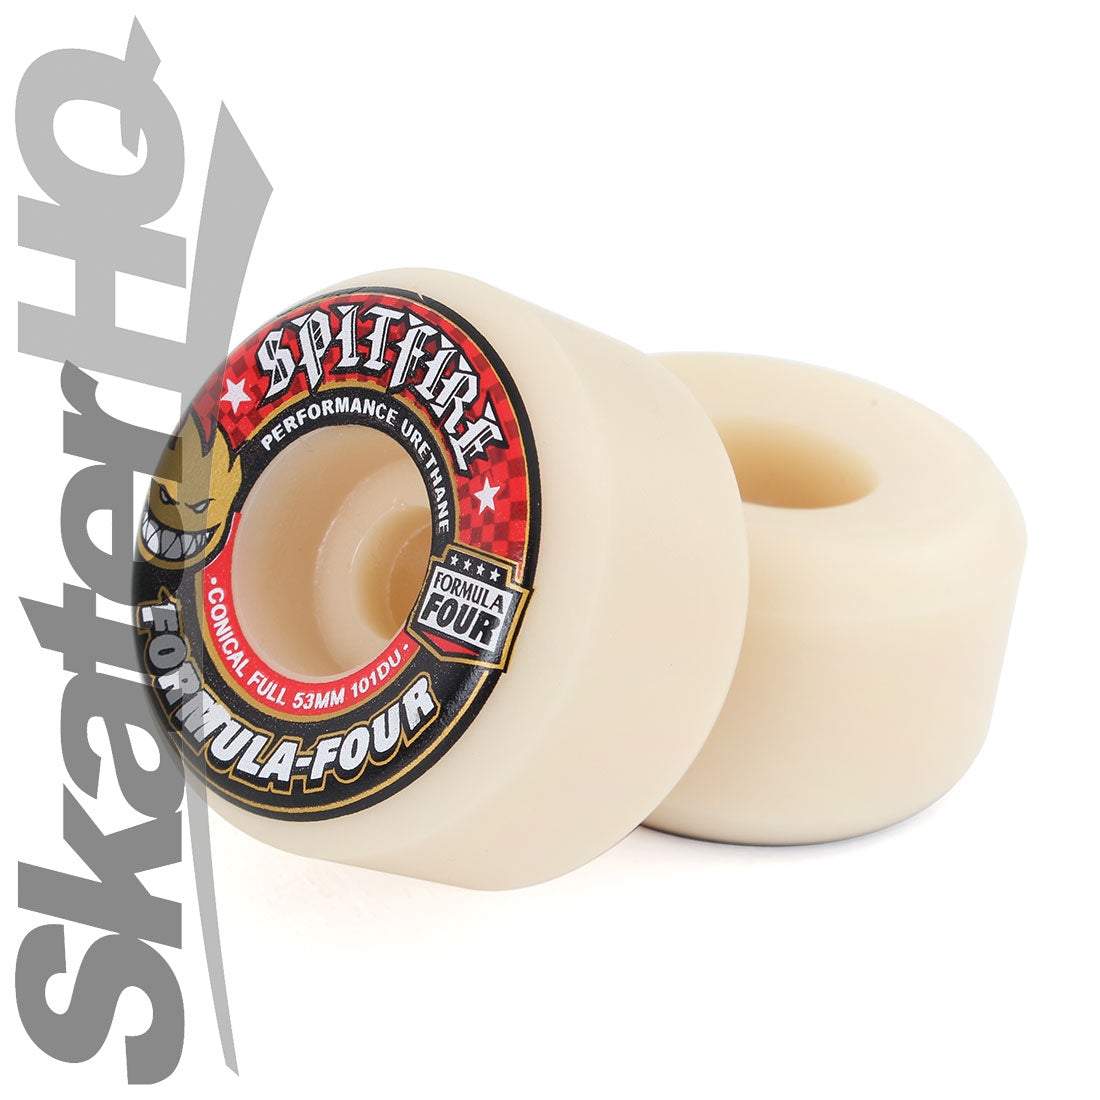 Spitfire Form Four 53mm 101A Conical Full - Red Skateboard Wheels